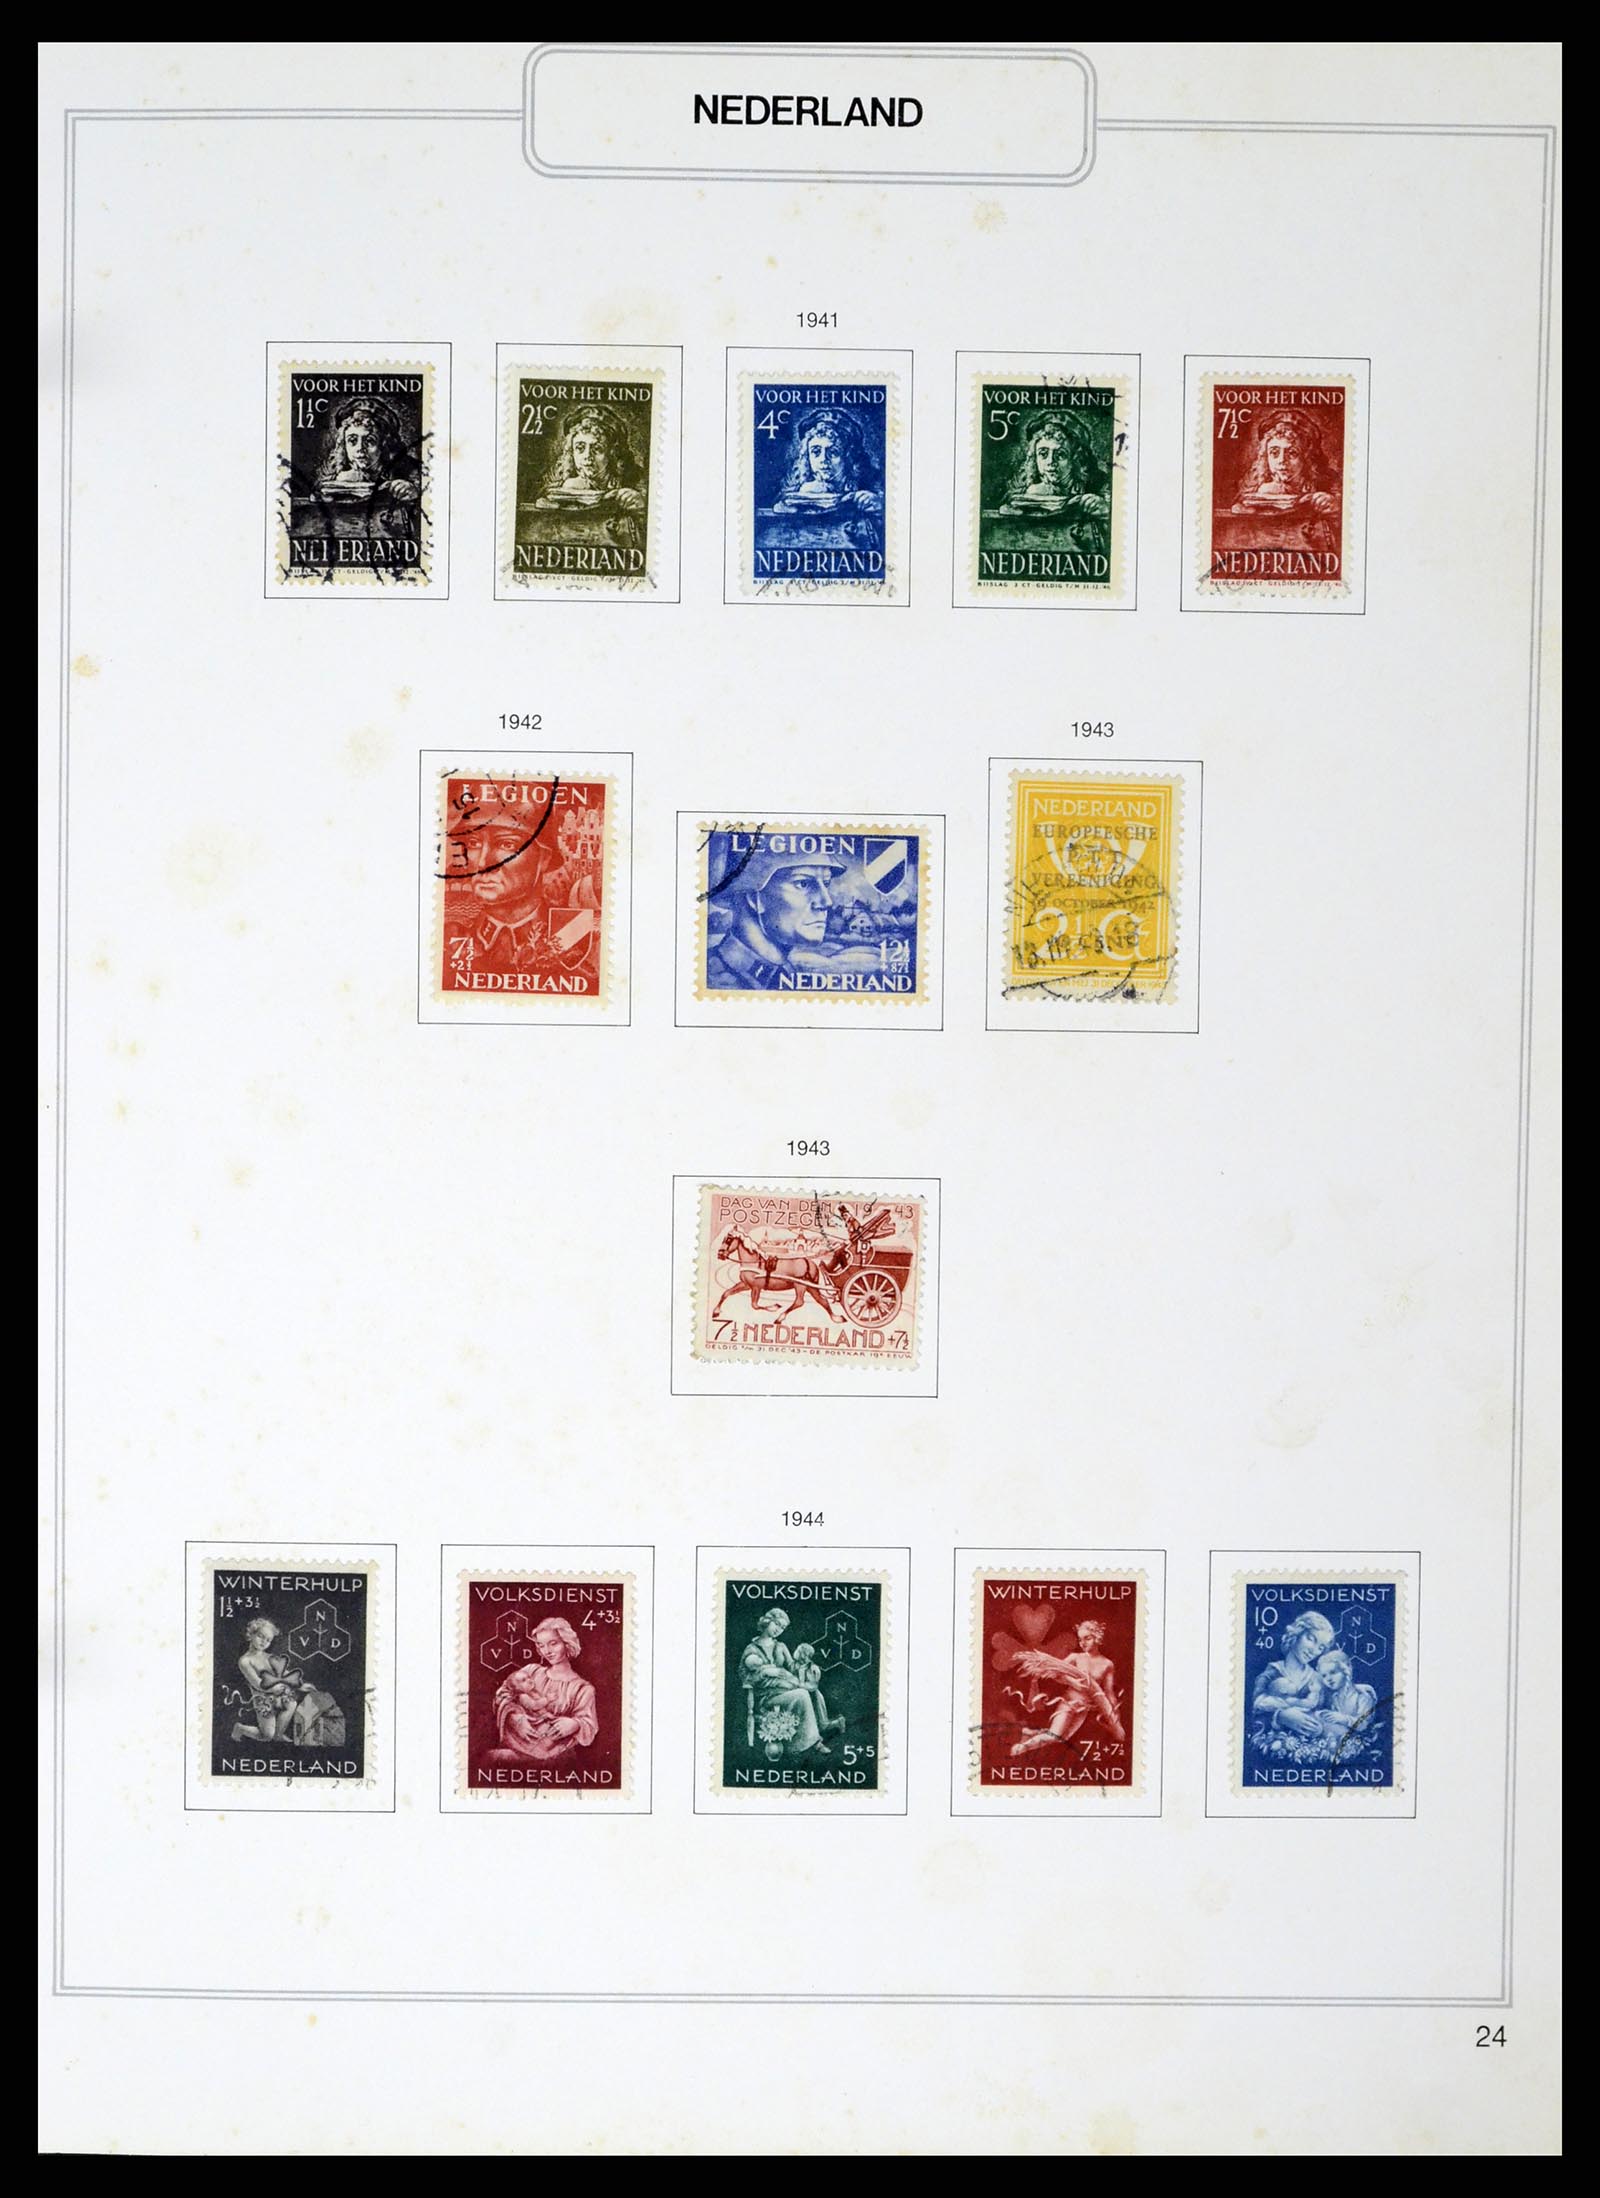 37348 024 - Stamp collection 37348 Netherlands 1852-1995.